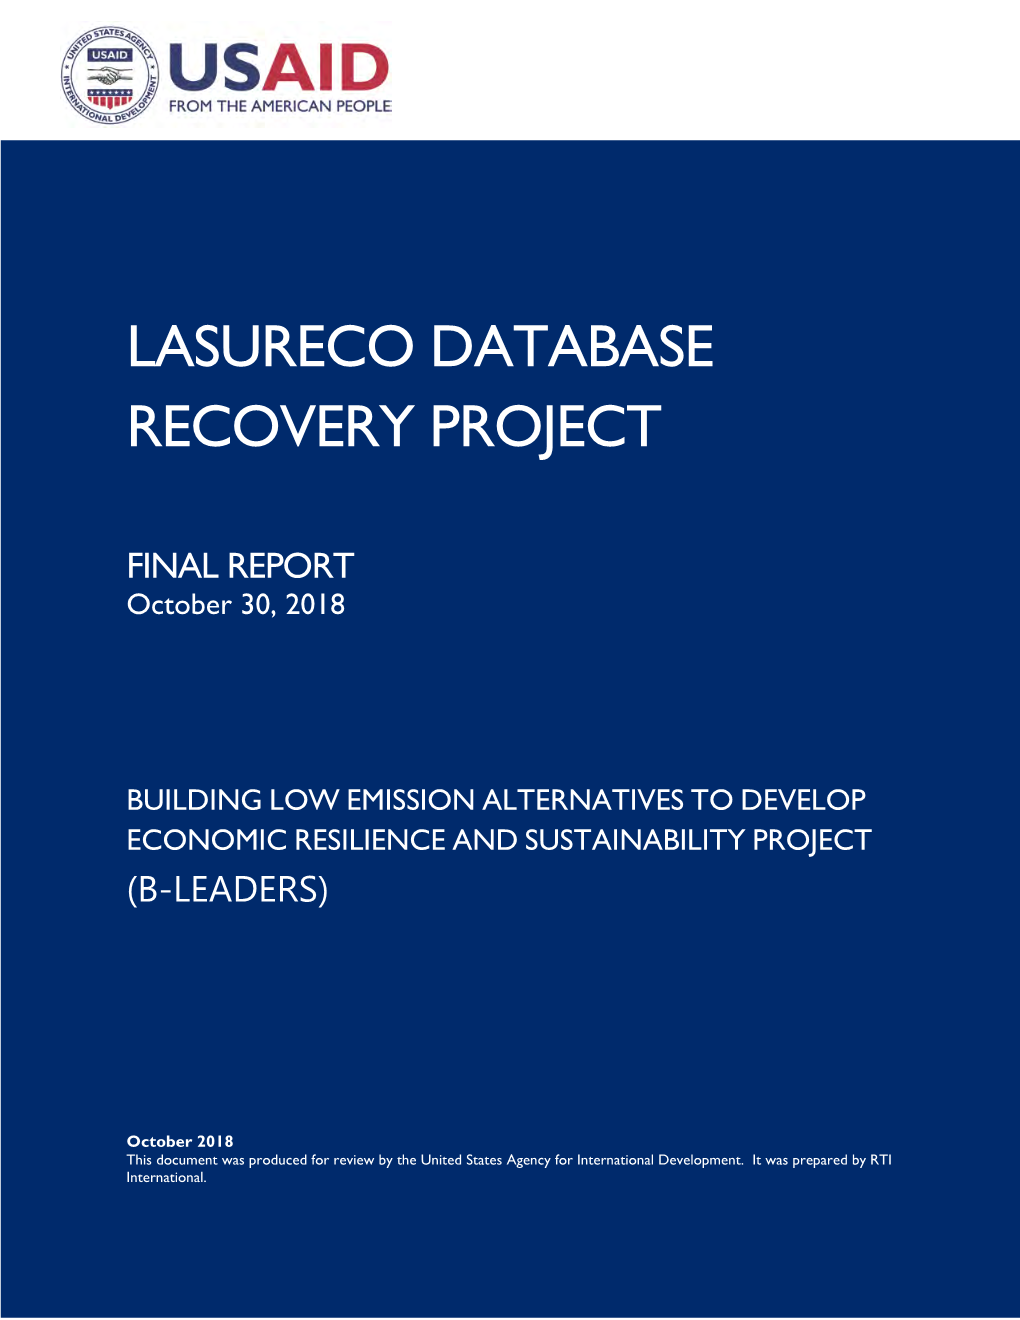 Lasureco Database Recovery Project